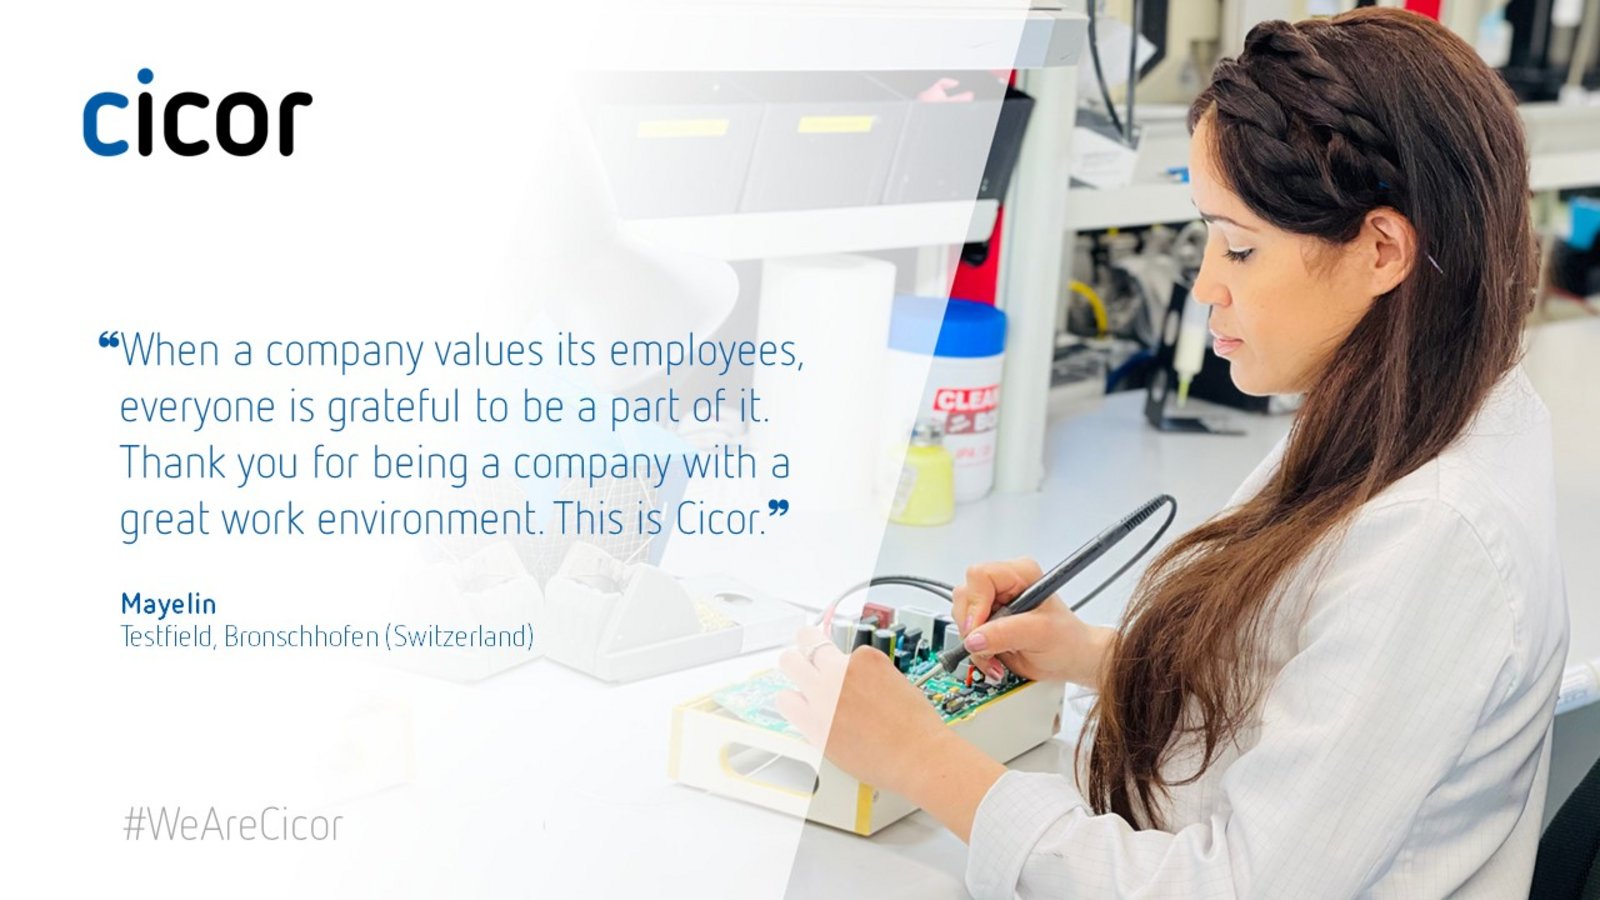 Testimonial of Mayelin who works at the Cicor site in Bronschhofen